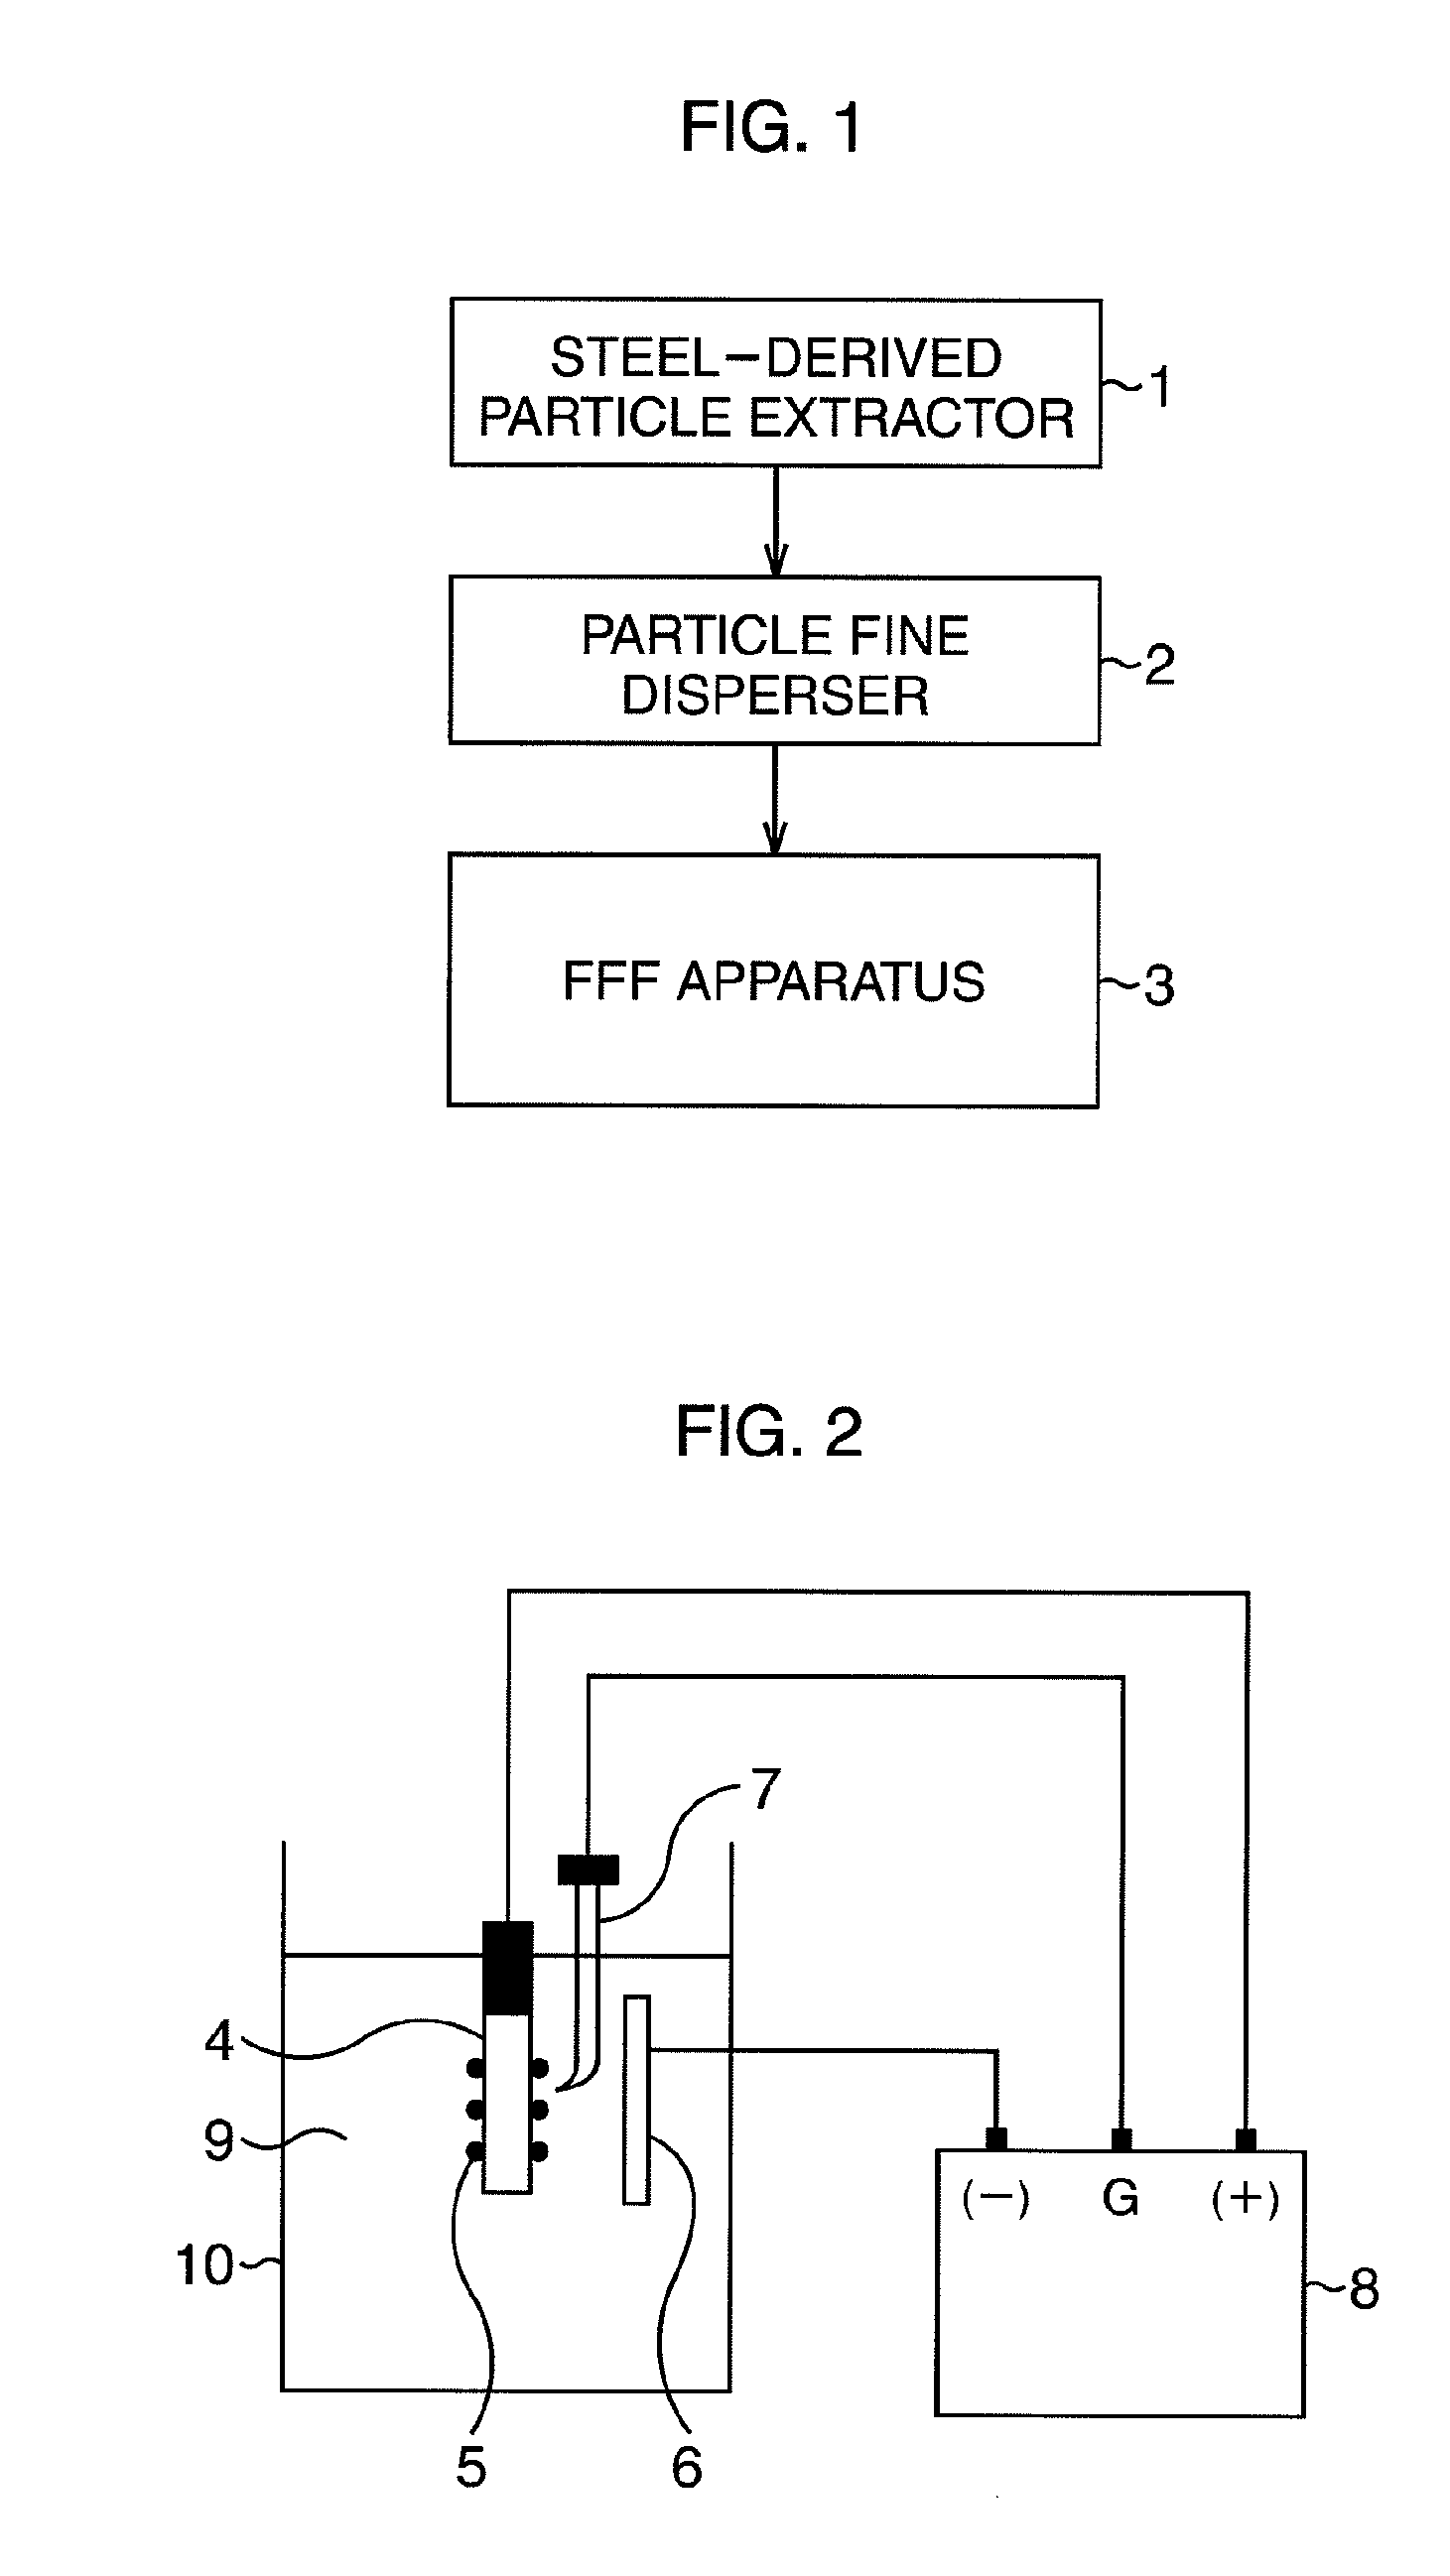 Method of analyzing particle size distribution of particles in metal material